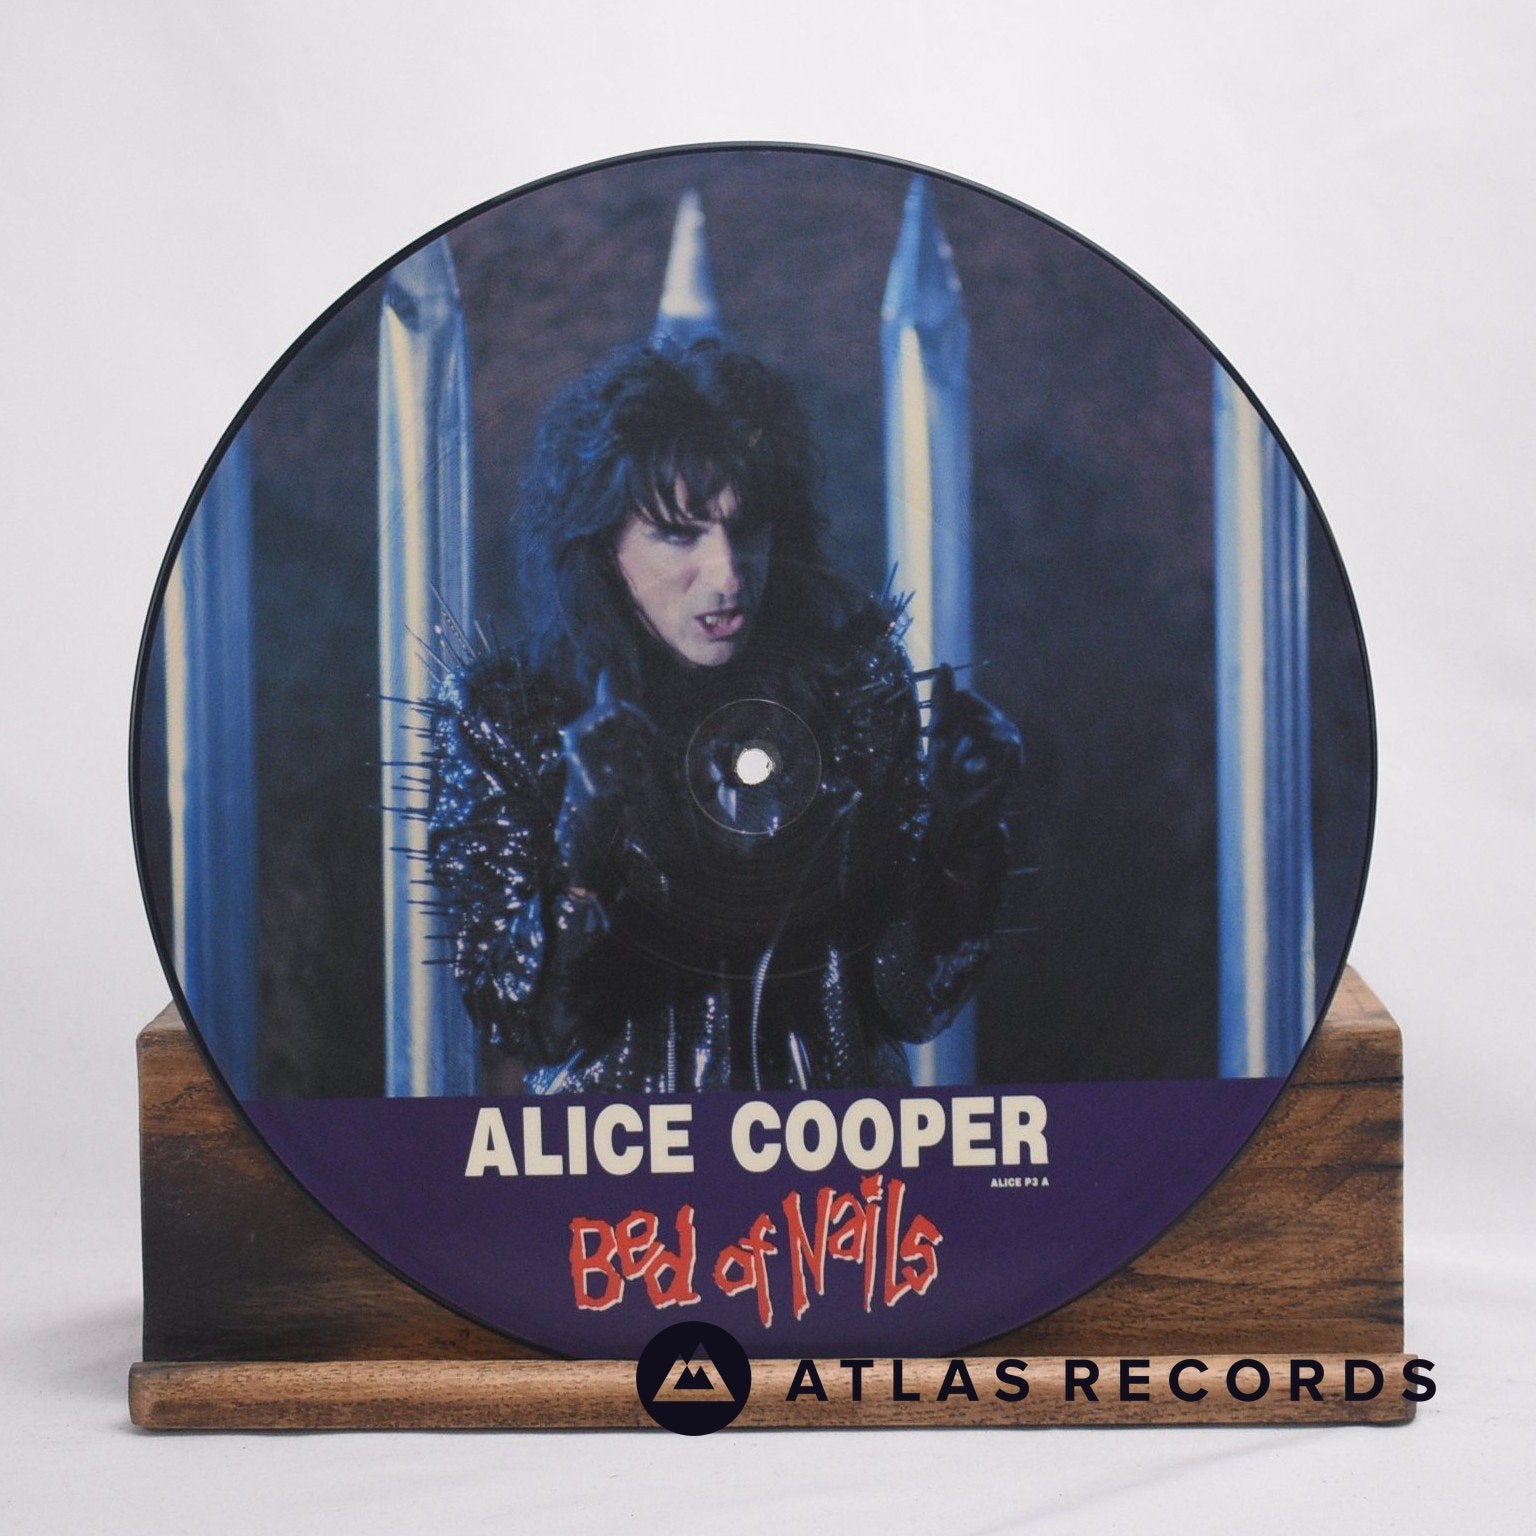 ALICE COOPER Bed of nails 7